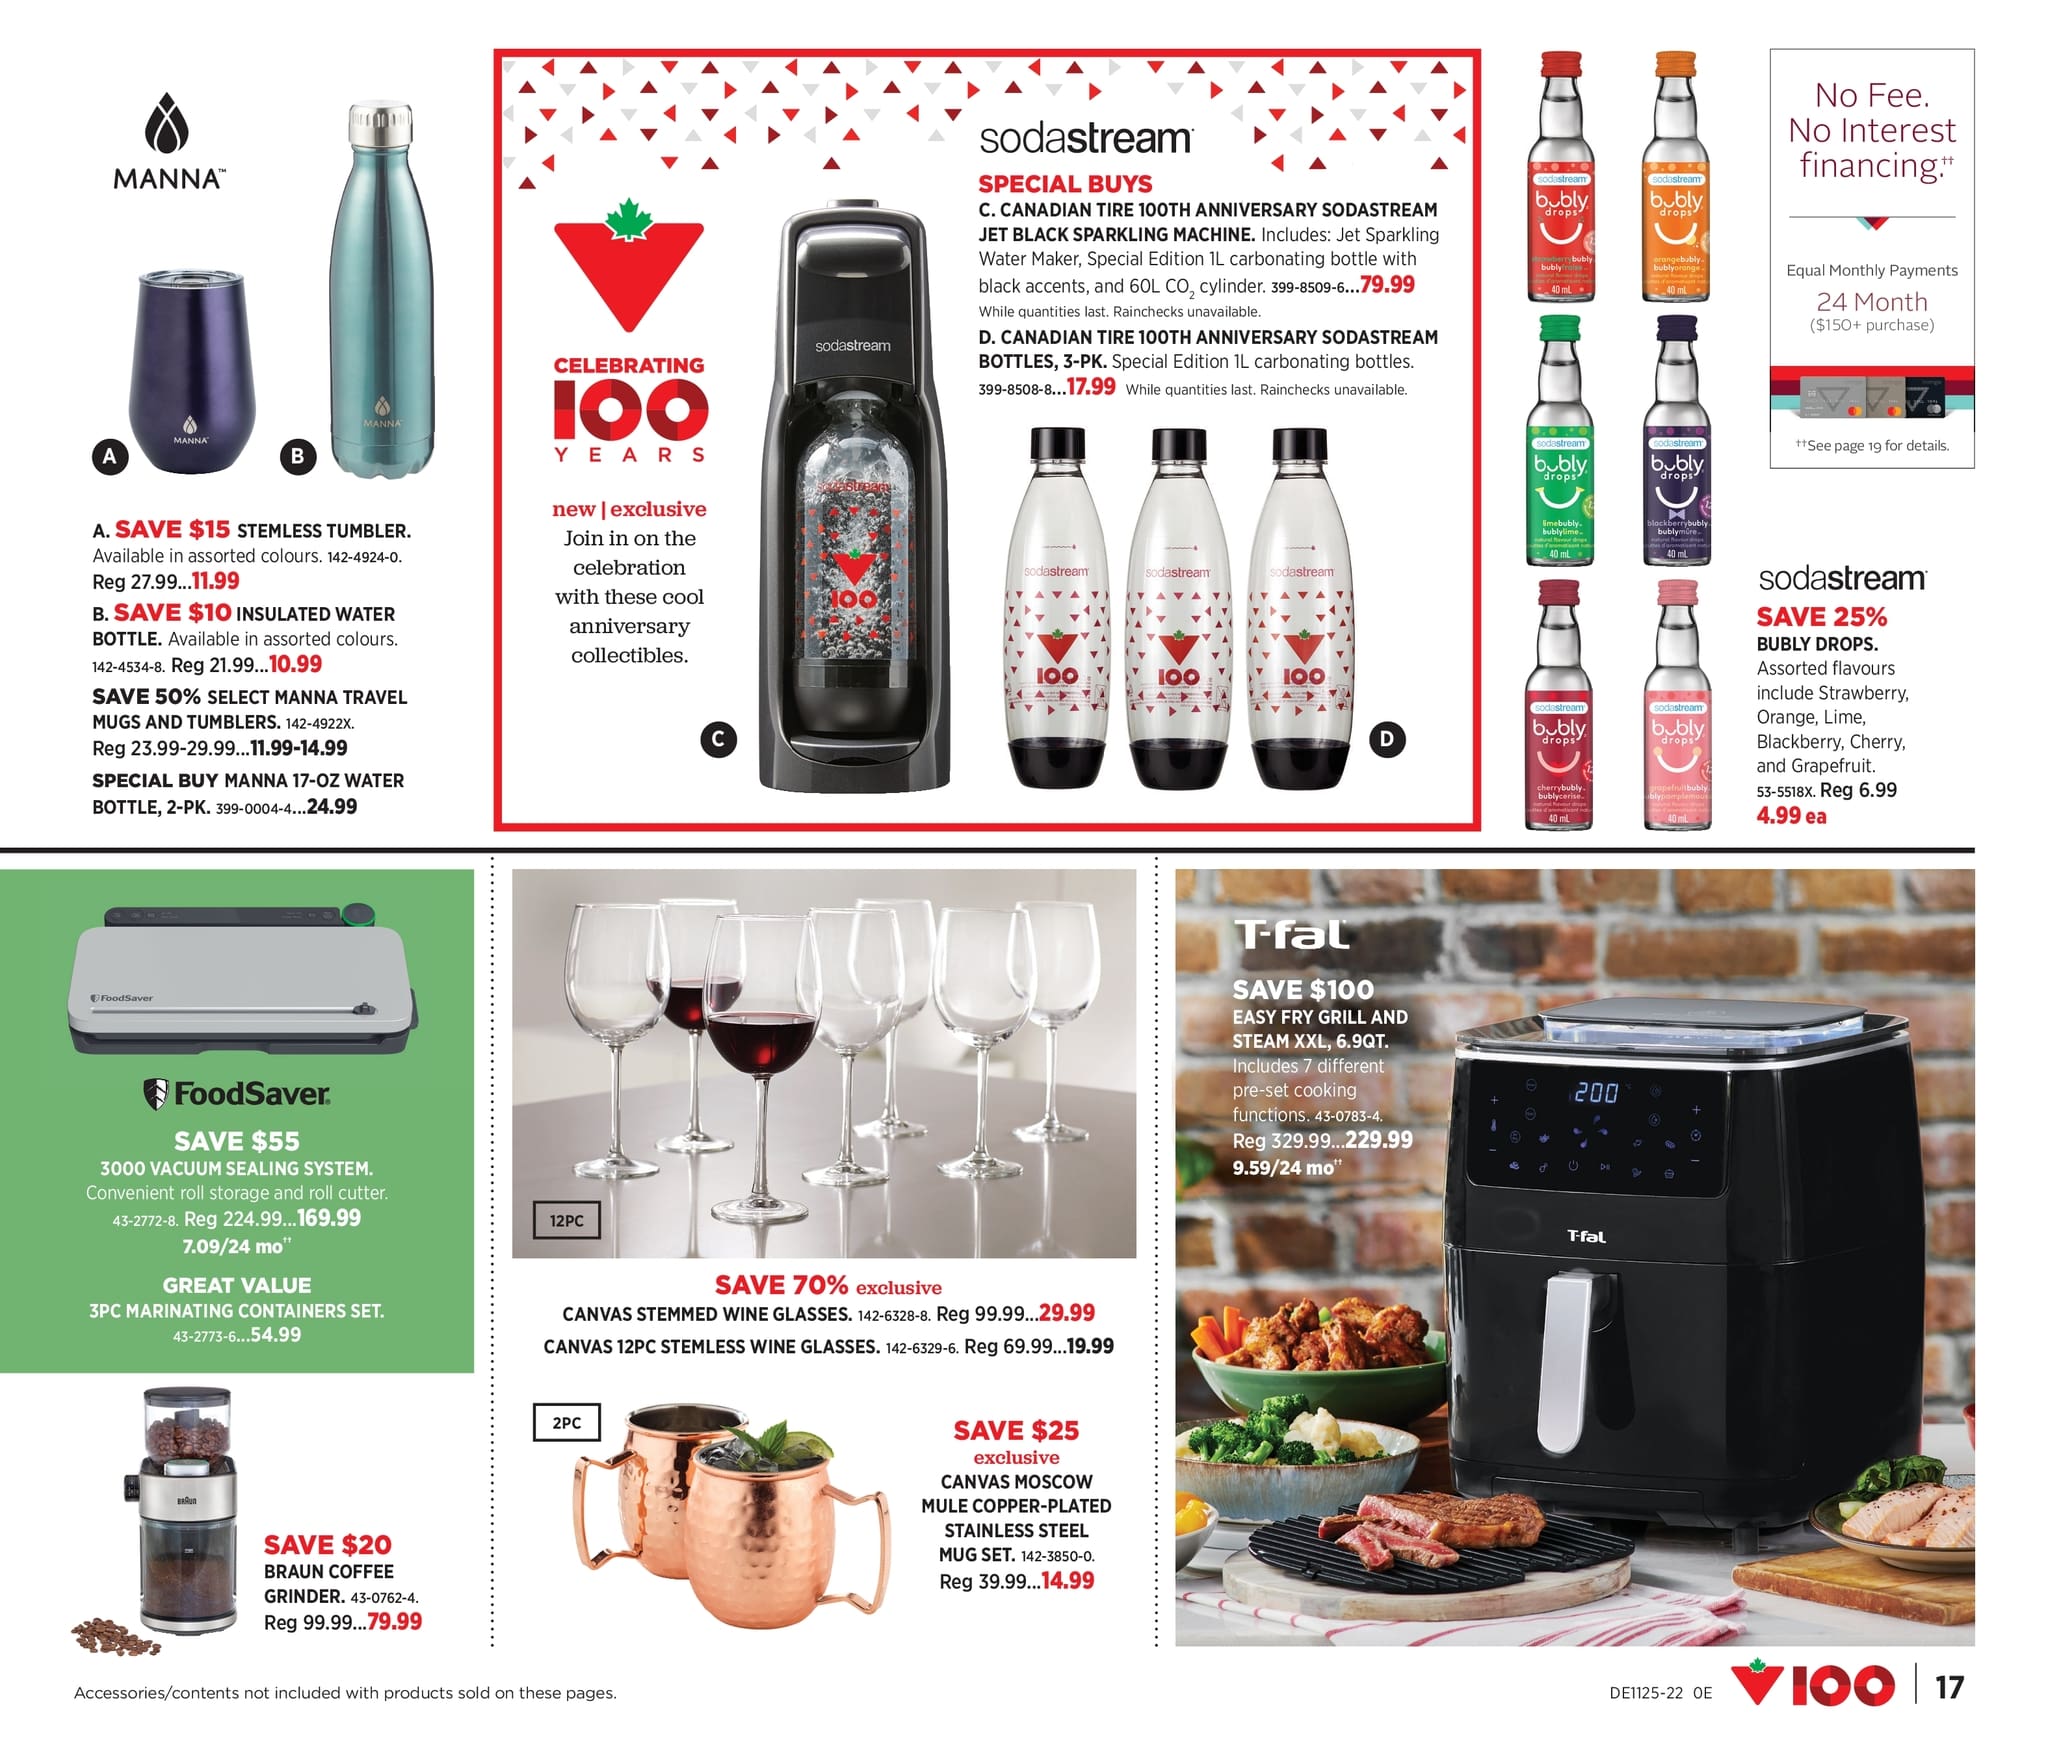 Canadian Tire - Summer Inspirations - Page 17